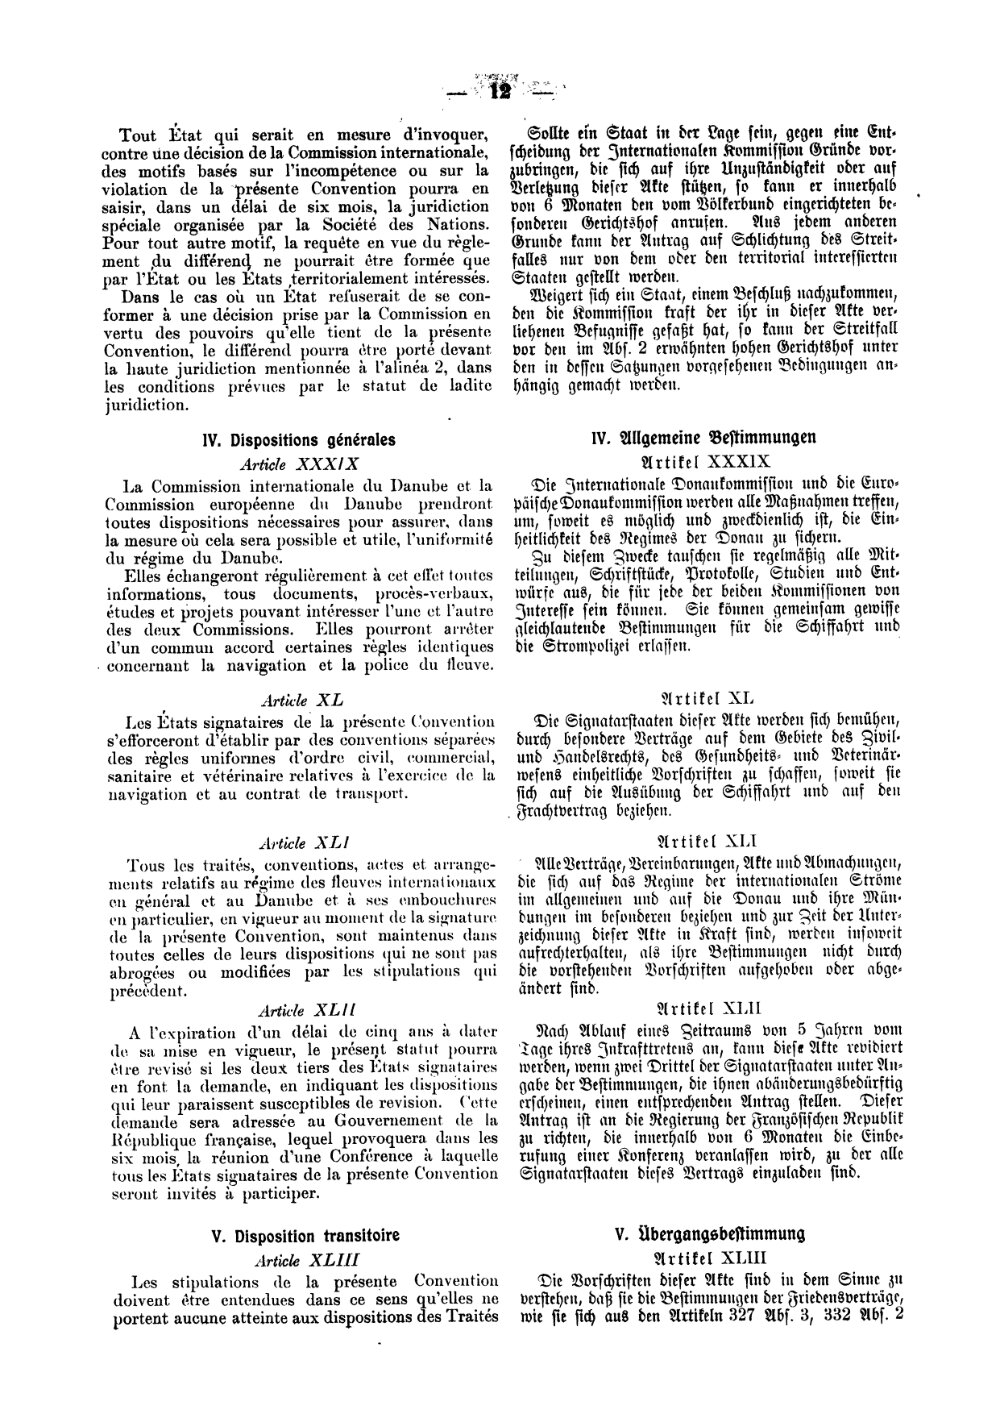 Scan of page 12